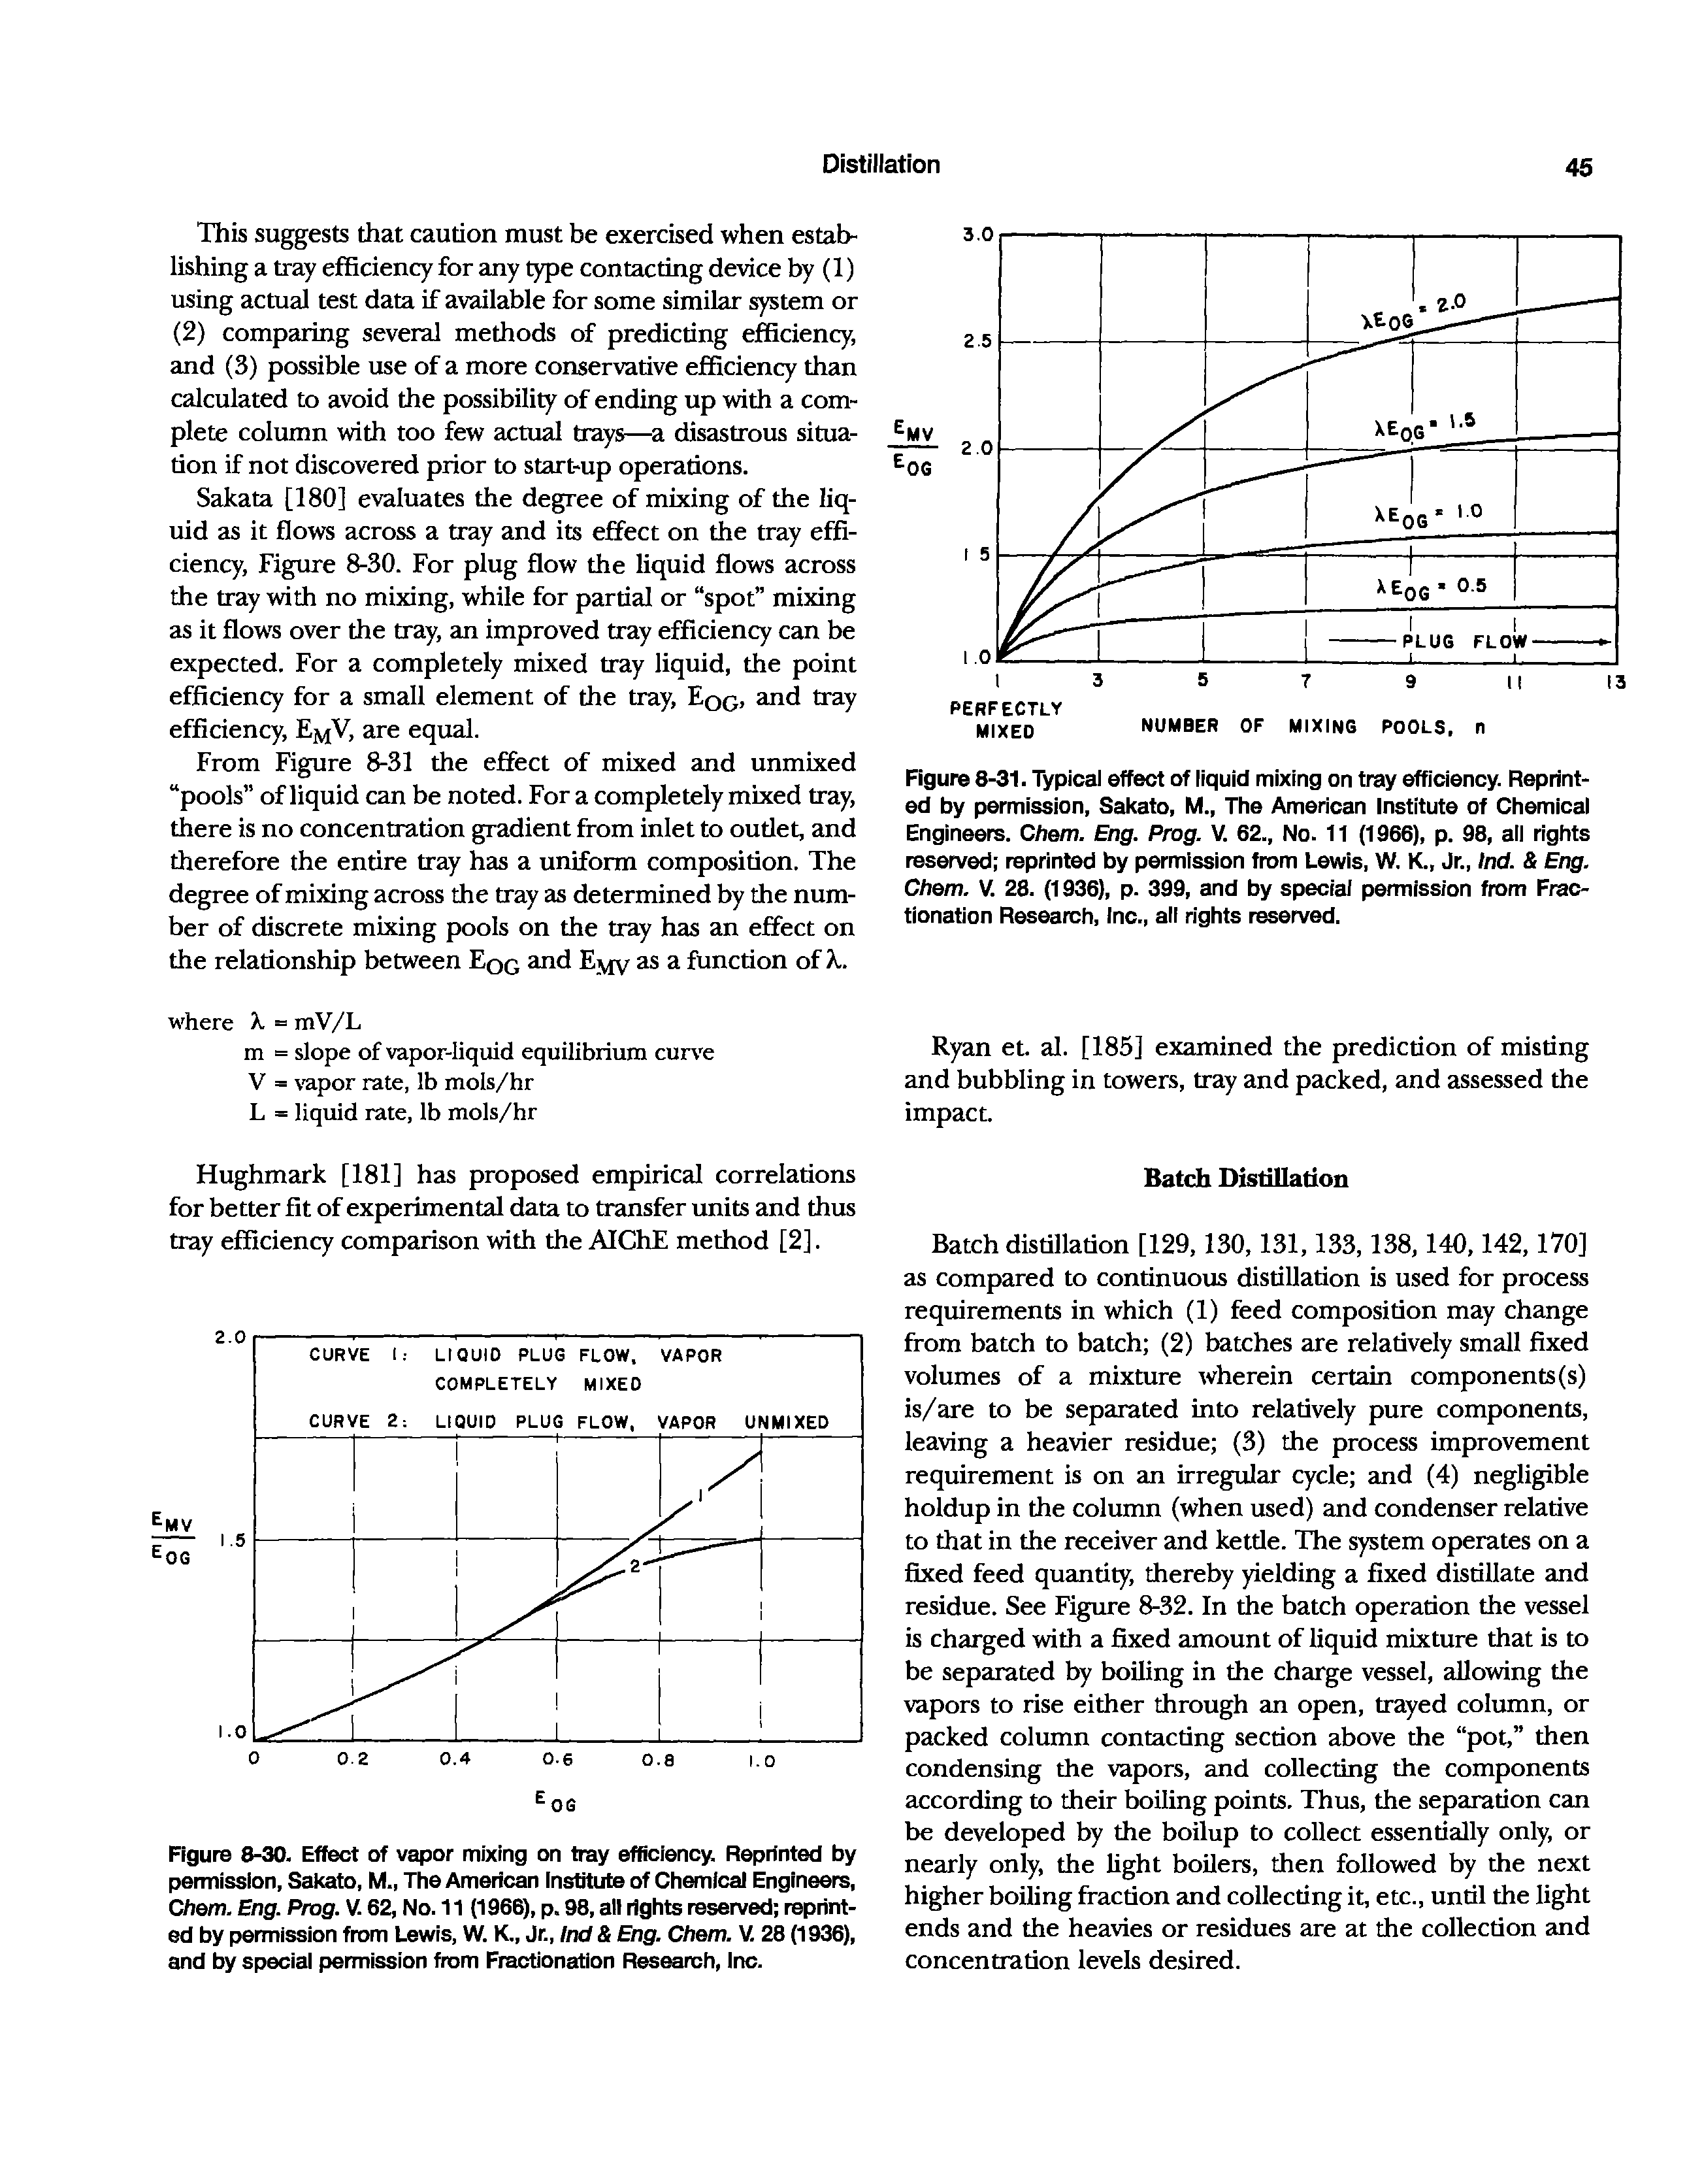 Figure 8-31. Typical effect of liquid mixing on tray efficiency. Reprinted by permission, Sakato, M., The American Institute of Chemical Engineers. Chem. Eng. Prog. V. 62., No. 11 (1966), p. 98, all rights reserved reprinted by permission from Lewis, W. K., Jr., Ind. Eng. Chem. V. 28. (1936), p. 399, and by special permission from Fractionation Research, Inc., all rights reserved.